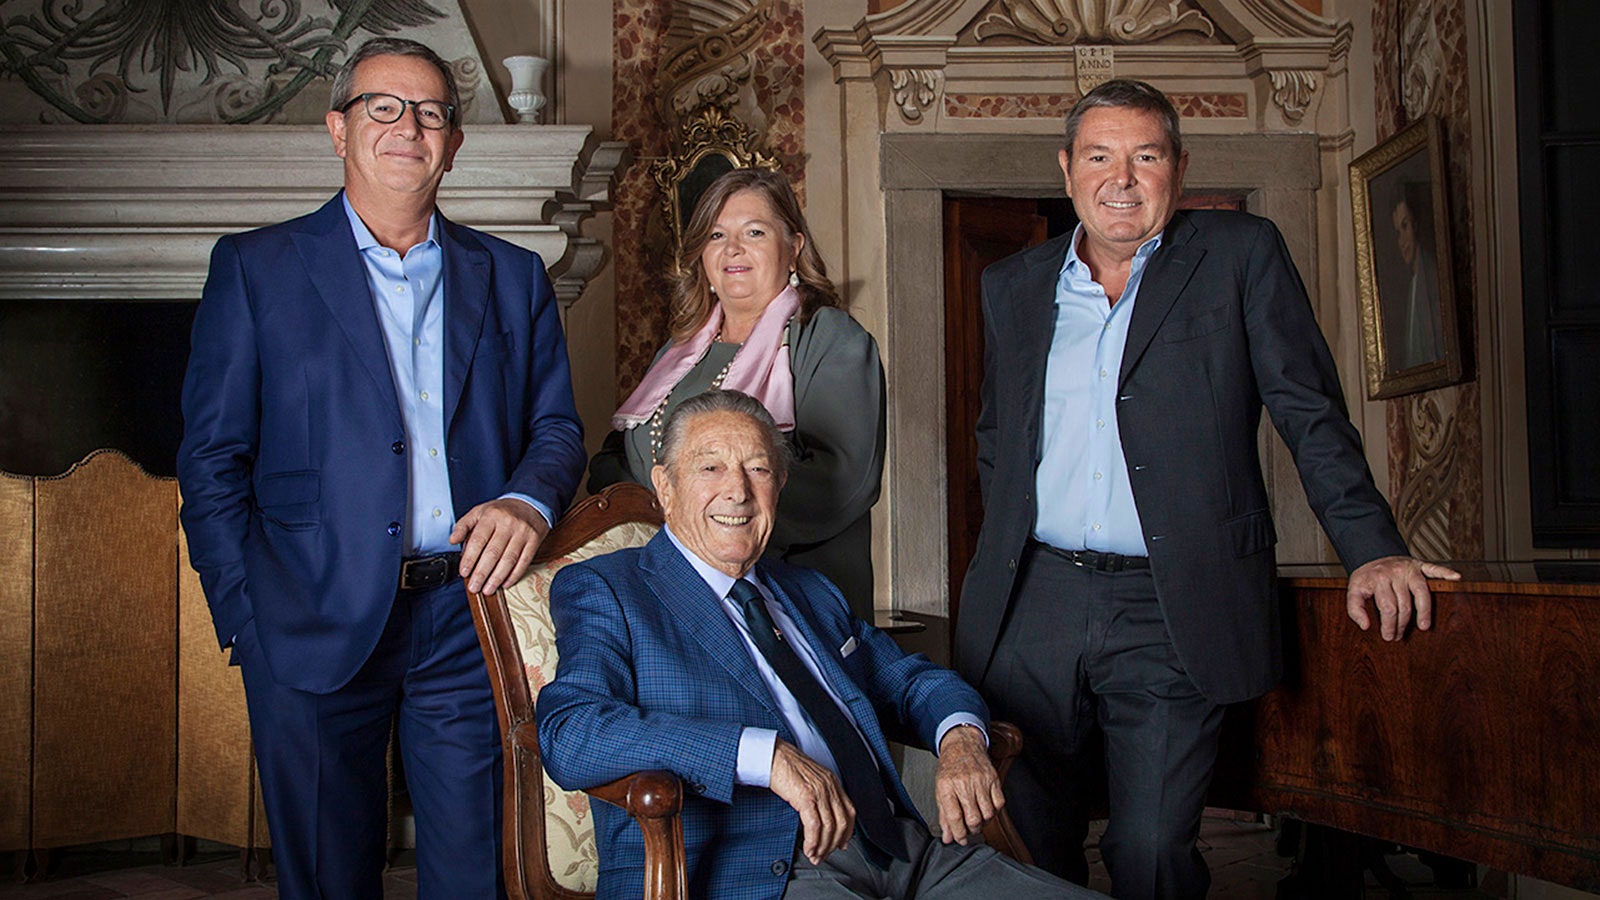  Franco Ziliani, seated, gathers with his children—Arturo, left, Cristina and Paolo—who now run the sparkling winery he helped found.